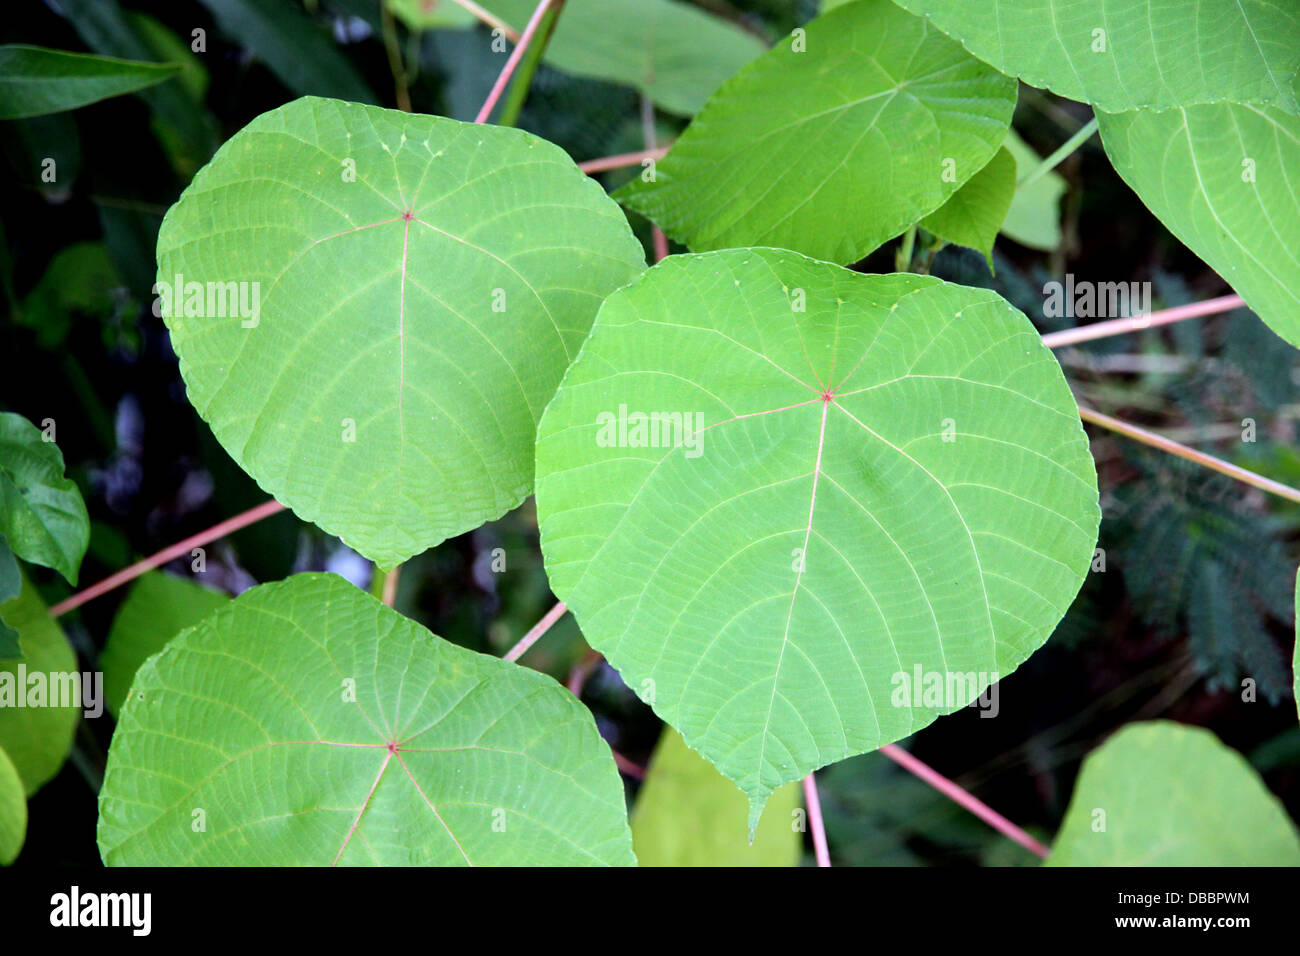 The Heart shaped leaves in the Vegetable garden. Stock Photo